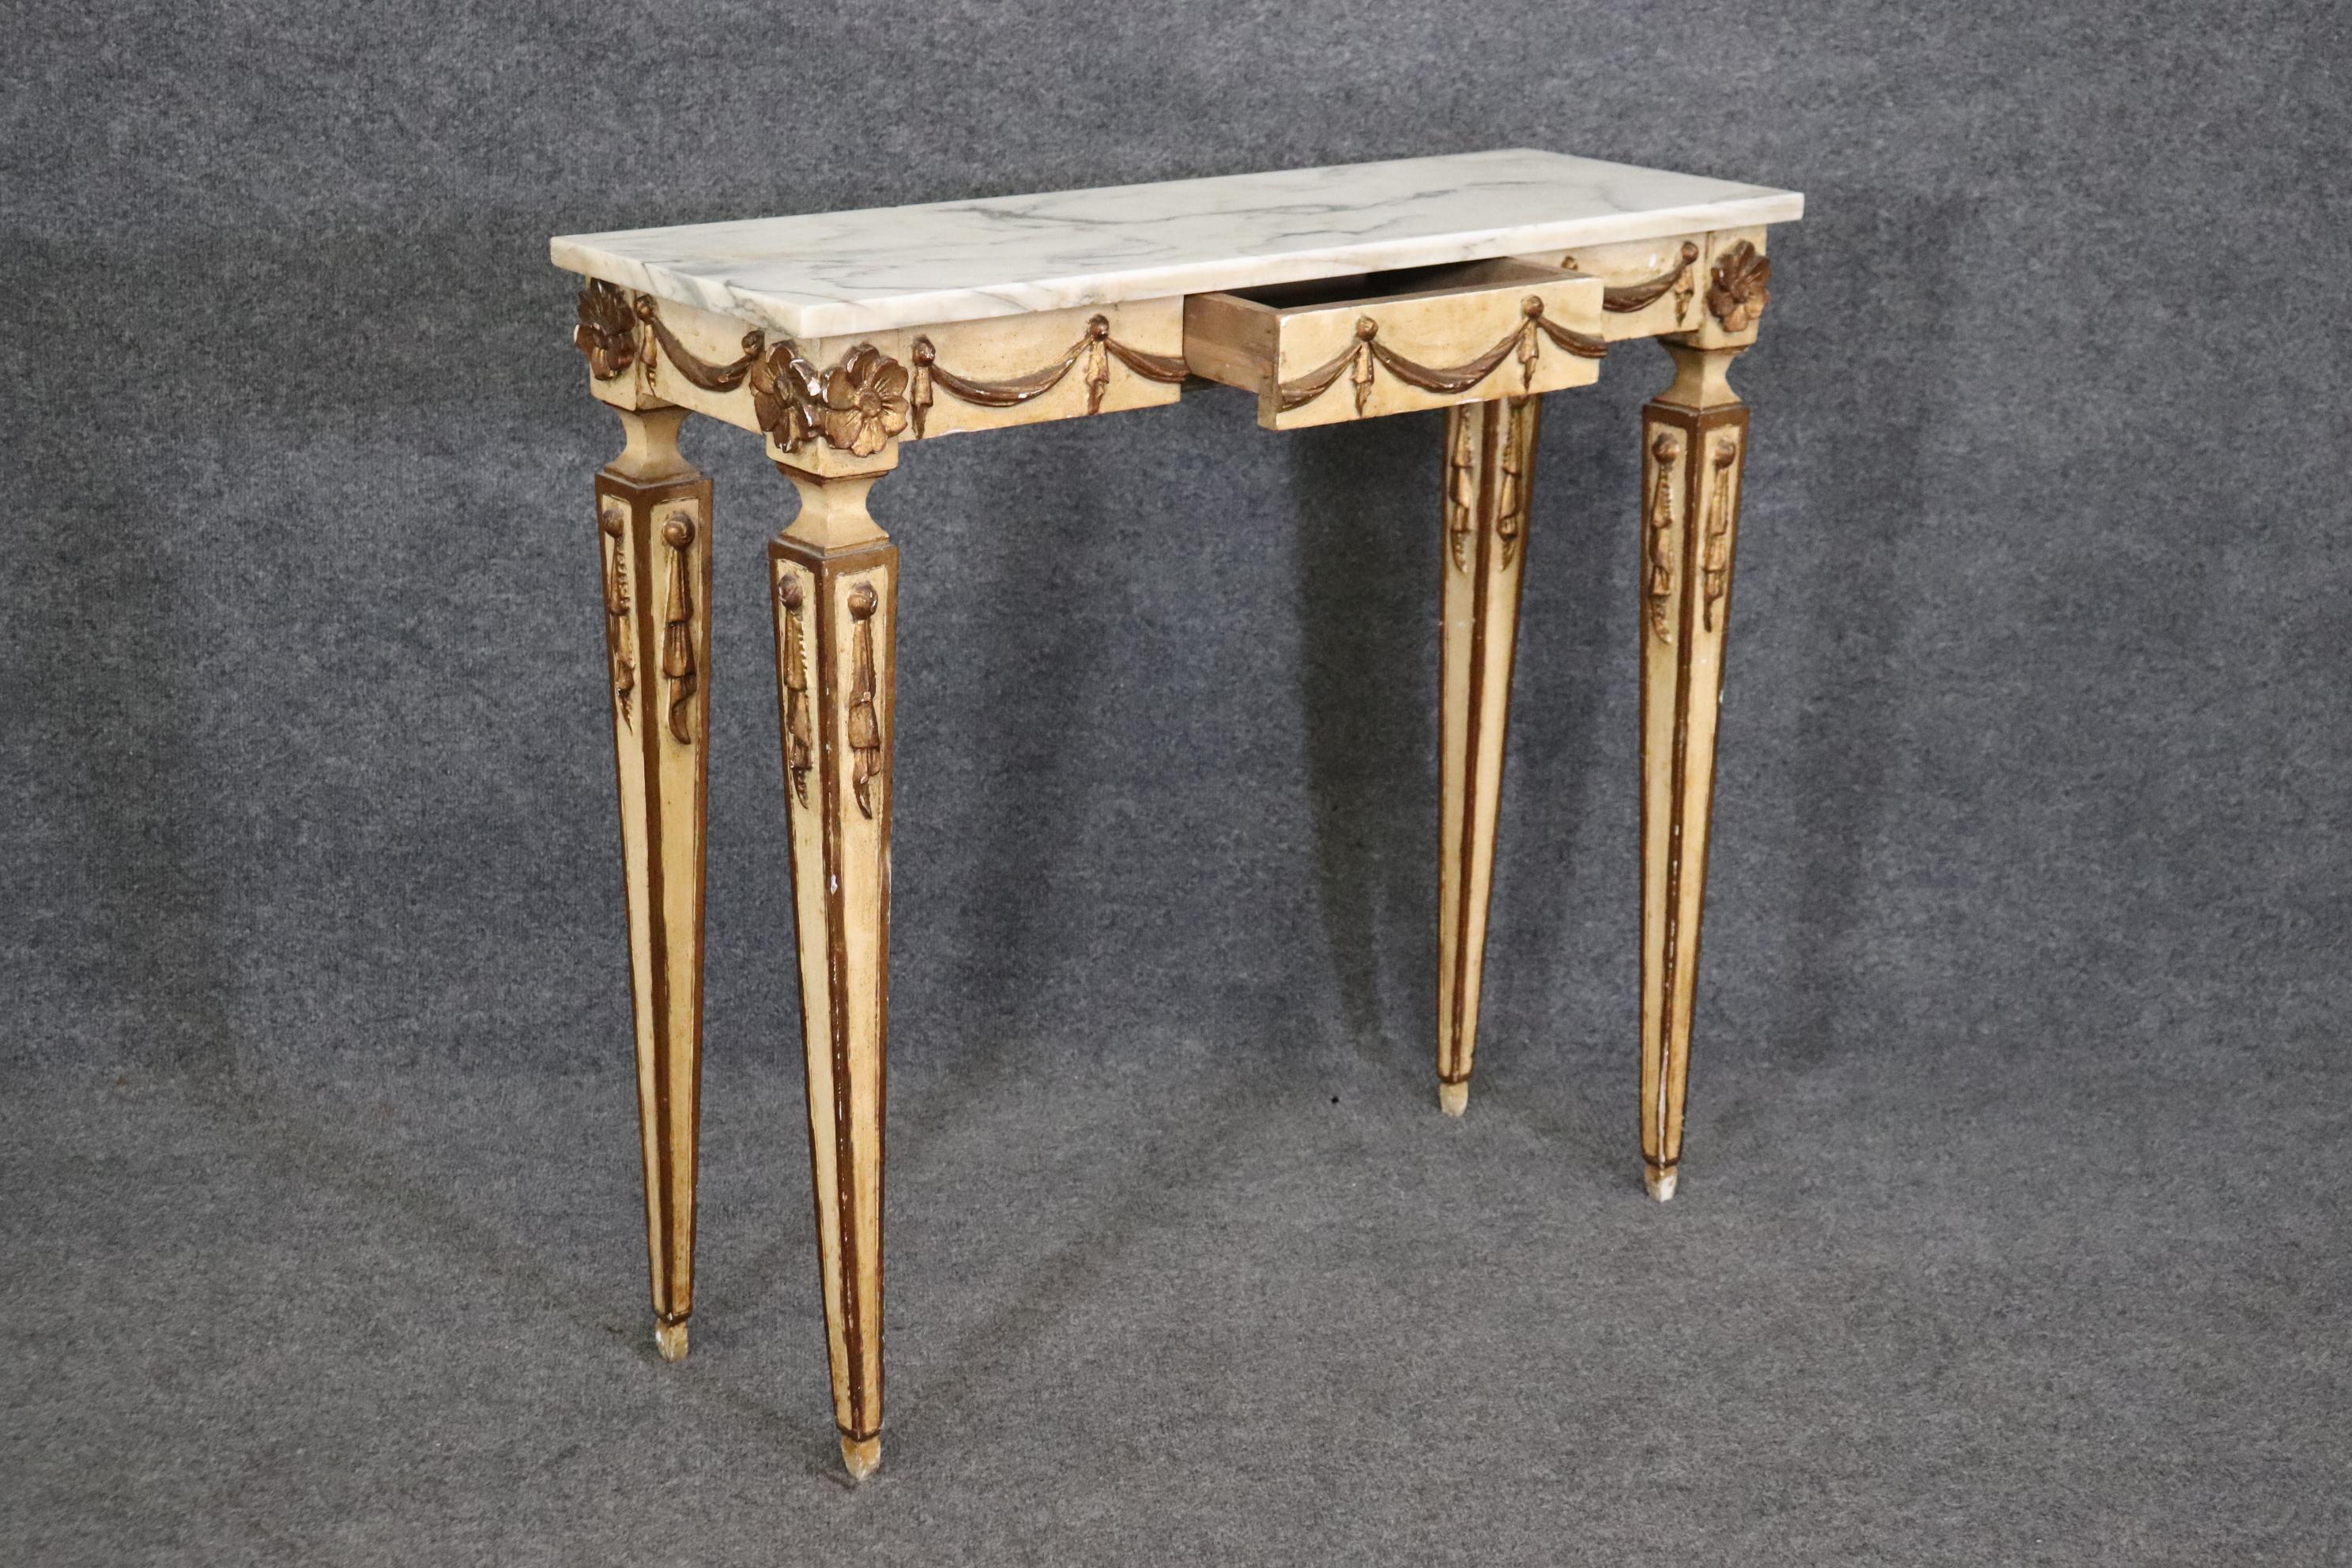 Creme Painted Marble Top Neoclassical Style Italian Console Table with Drawer For Sale 1